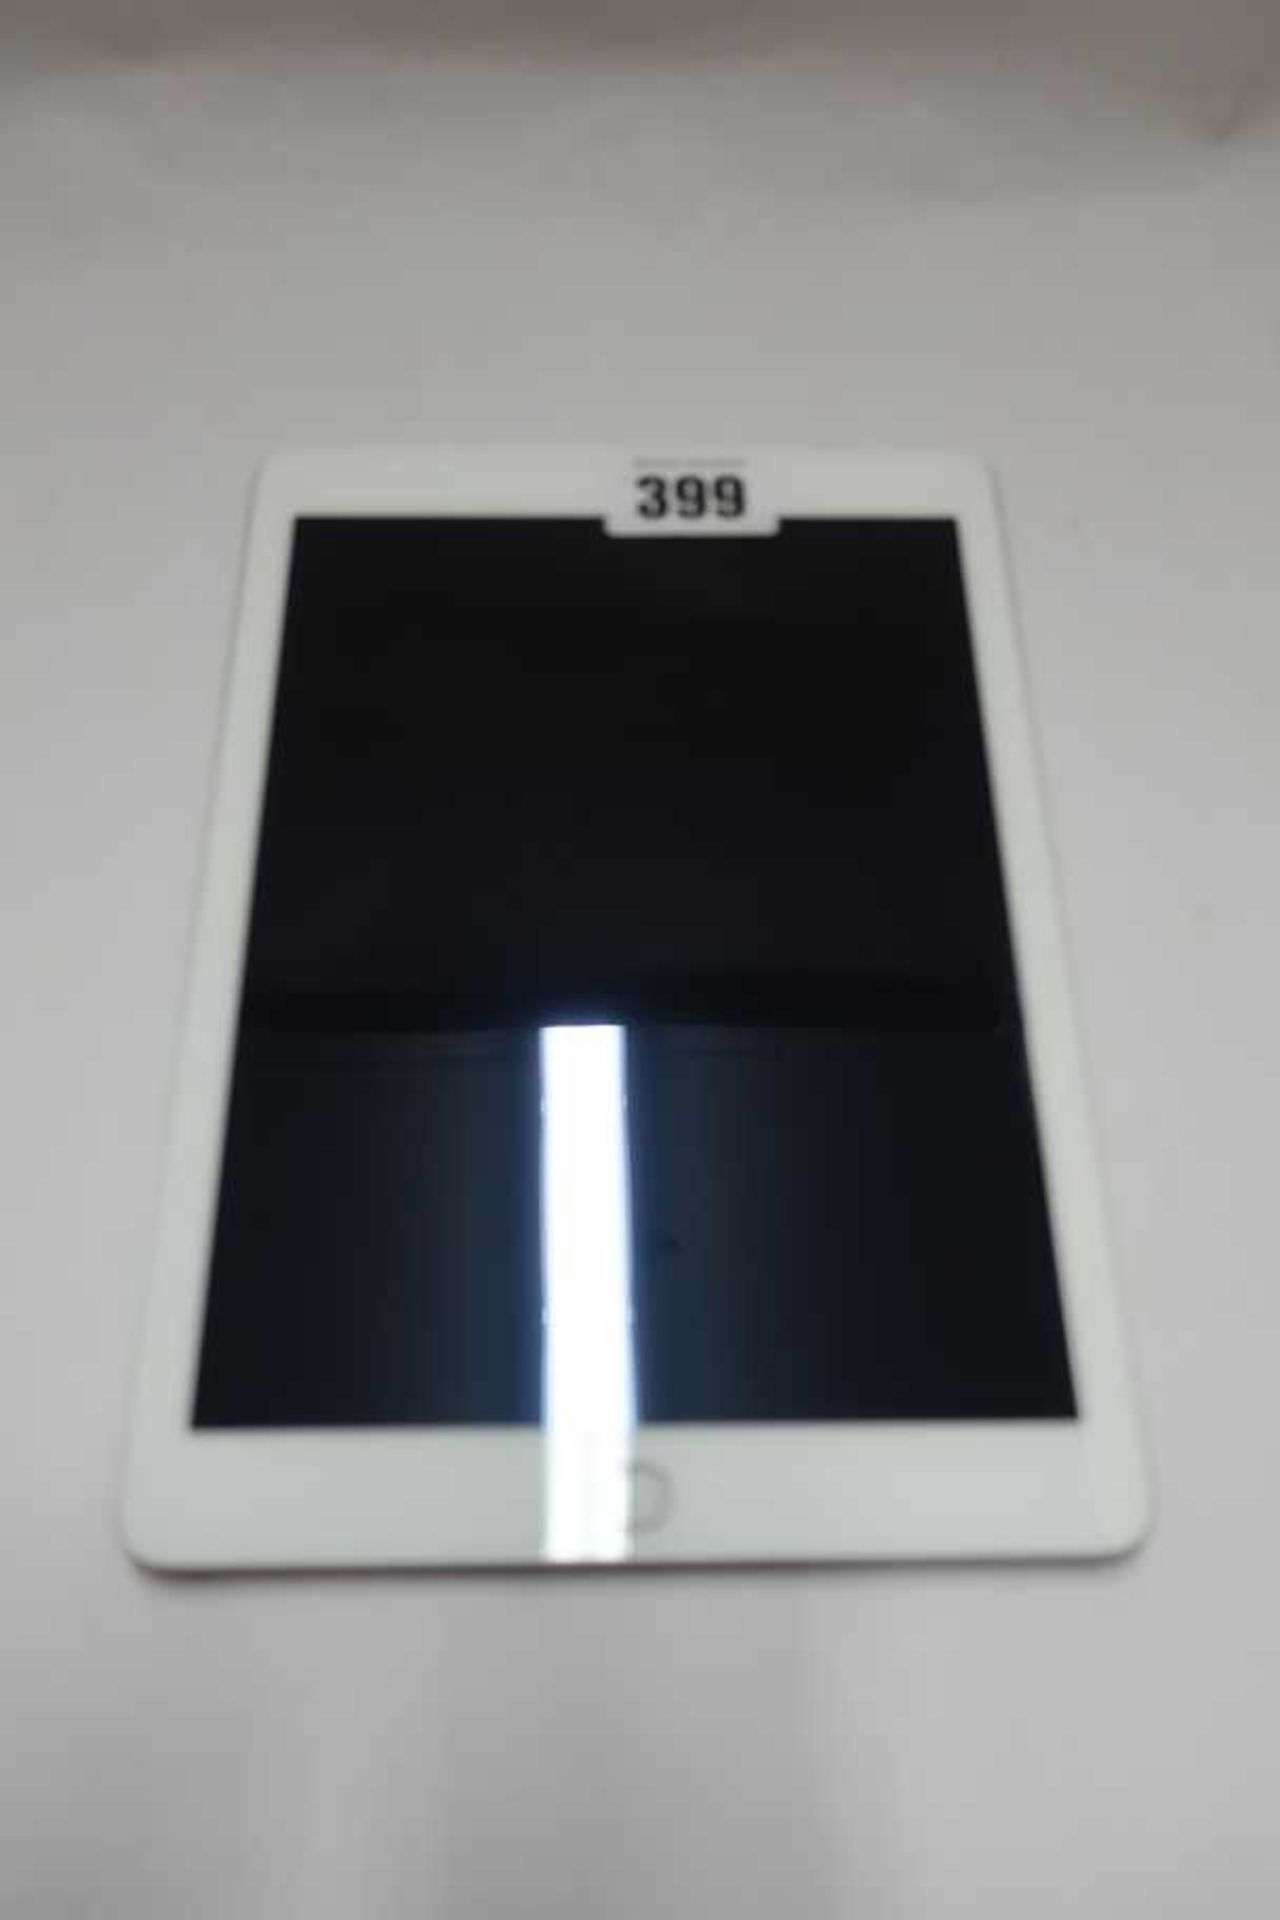 A pre-owned Apple iPad 9.7" 5th Gen (Wi-Fi Only) A1822 32GB in Silver (Serial: GCGV93L8HLFC) (